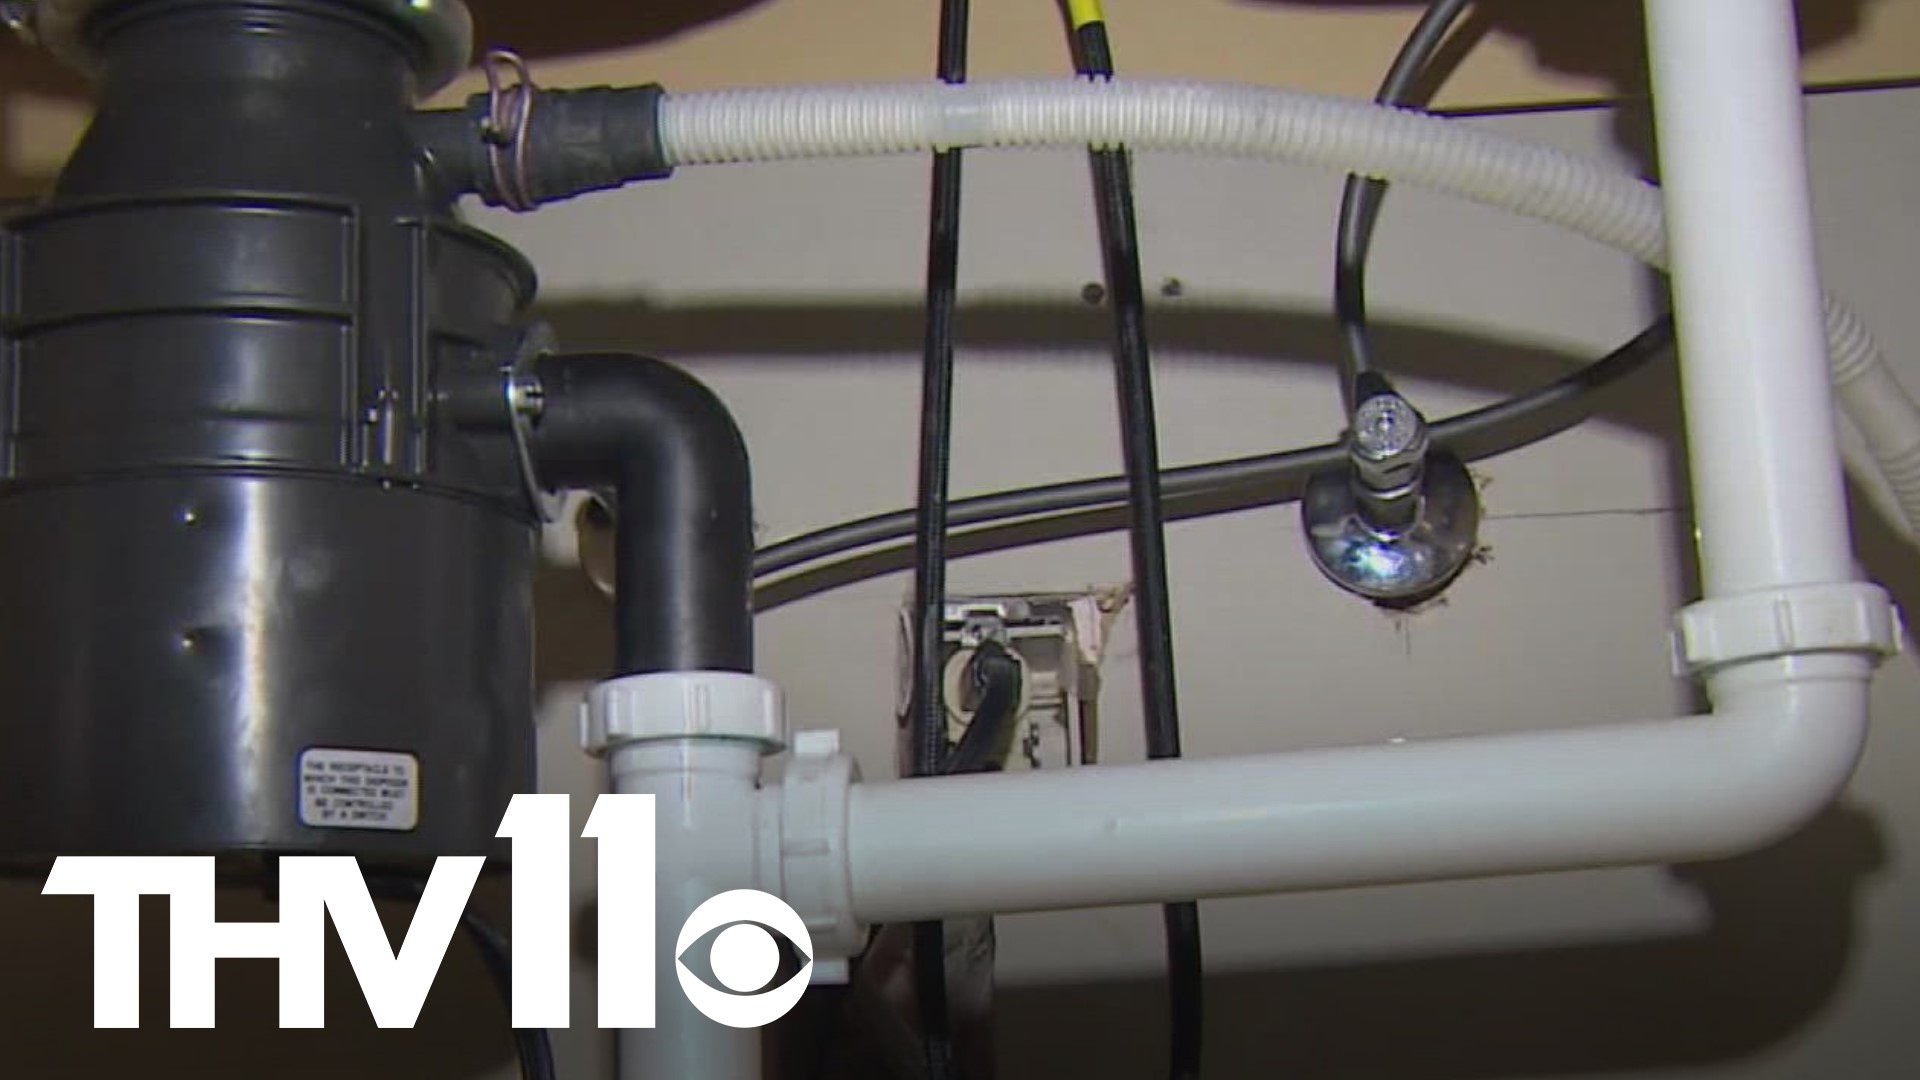 The holiday season is shaping up to be one of the busiest times for plumbers.